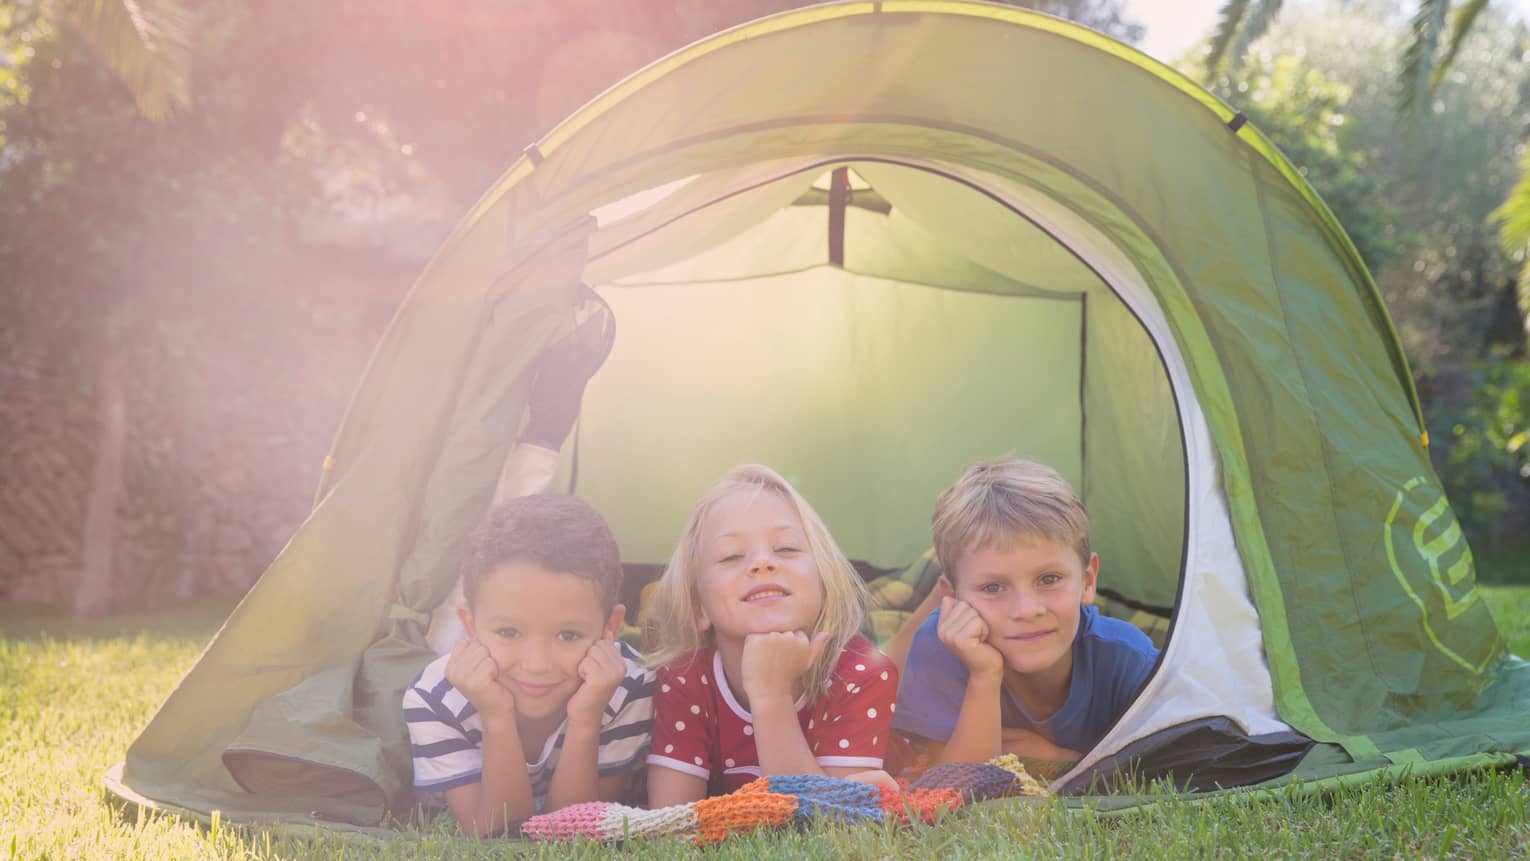 Children lay in a row under small tent opening on grass 